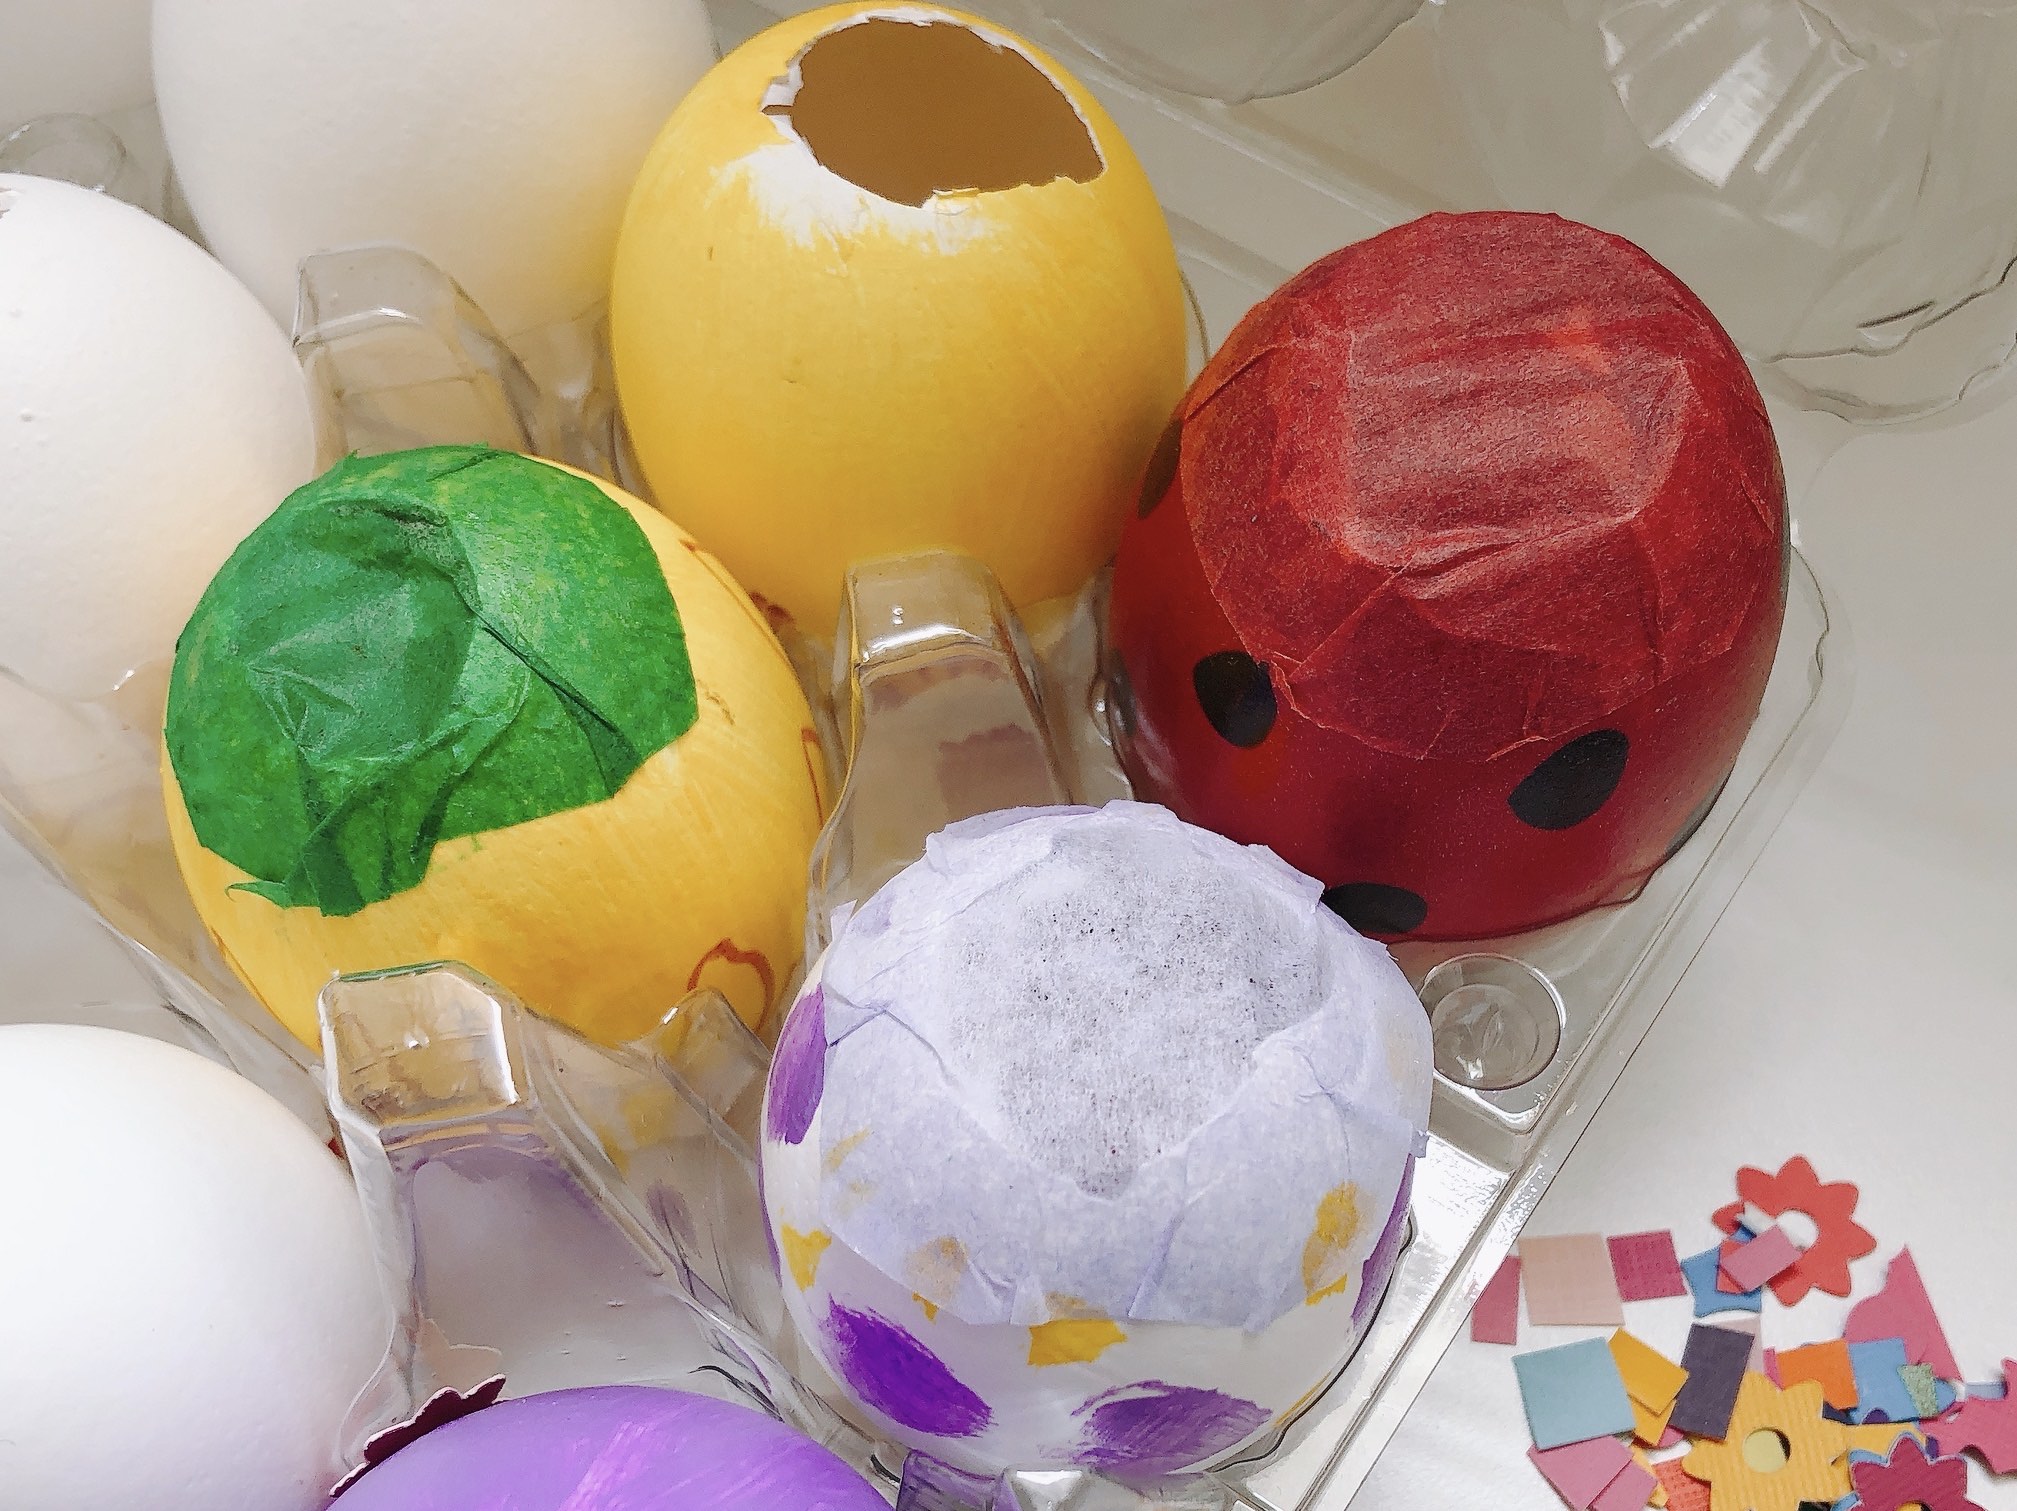 Decorate hollowed-out eggs, fill with confetti, and shower others by cracking the eggs over people's heads.